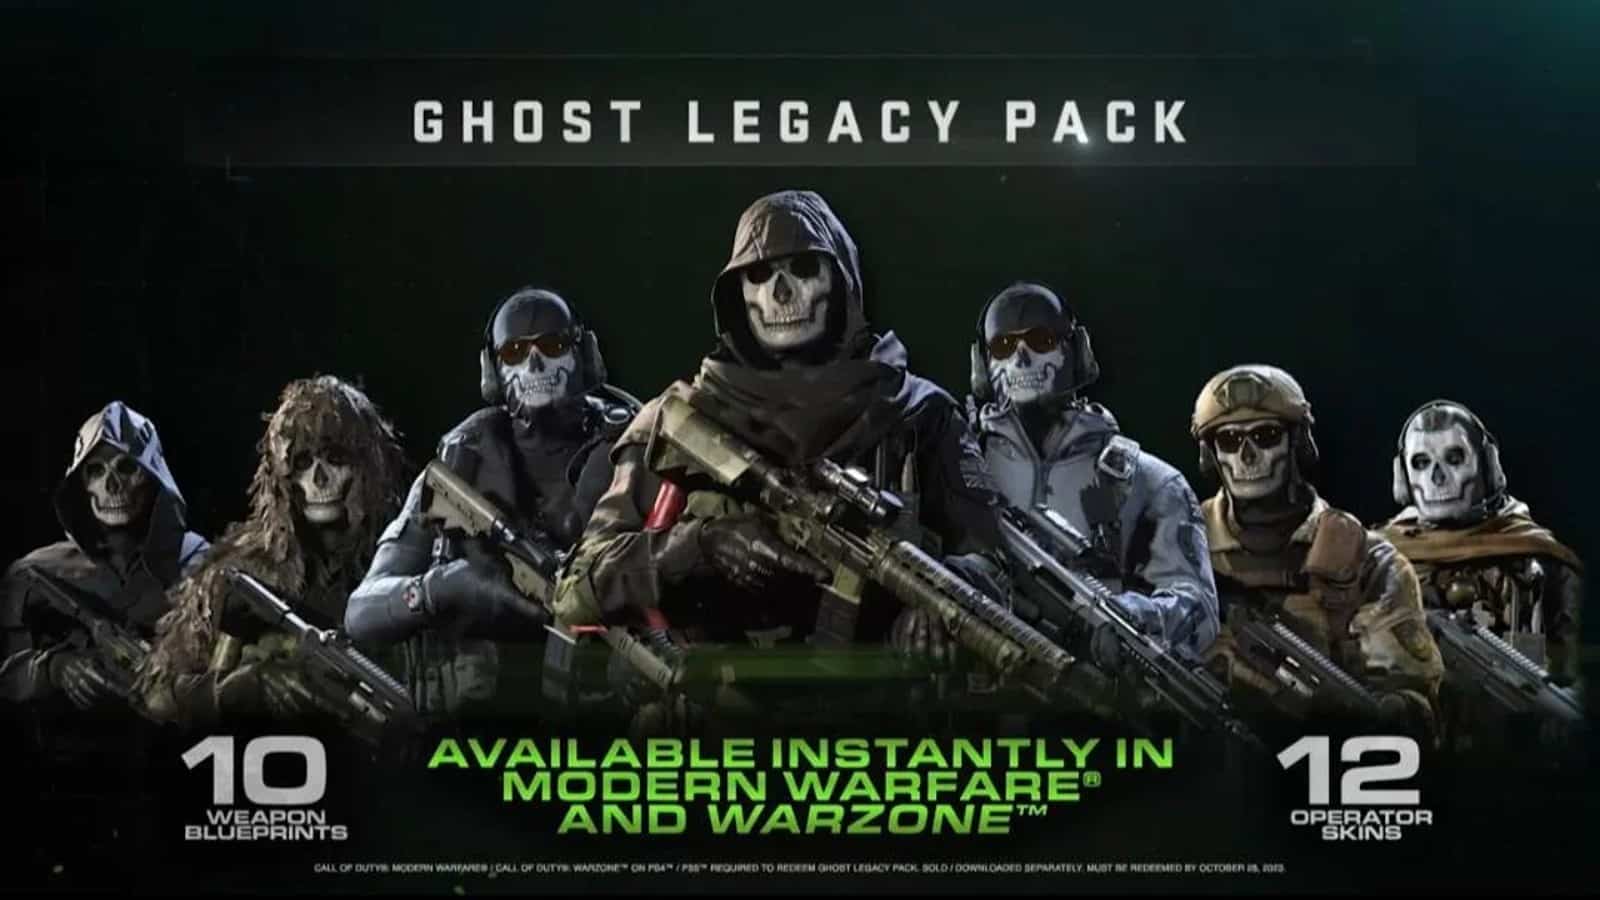 Call of Duty®: Modern Warfare® II Is Now Available for Pre-order